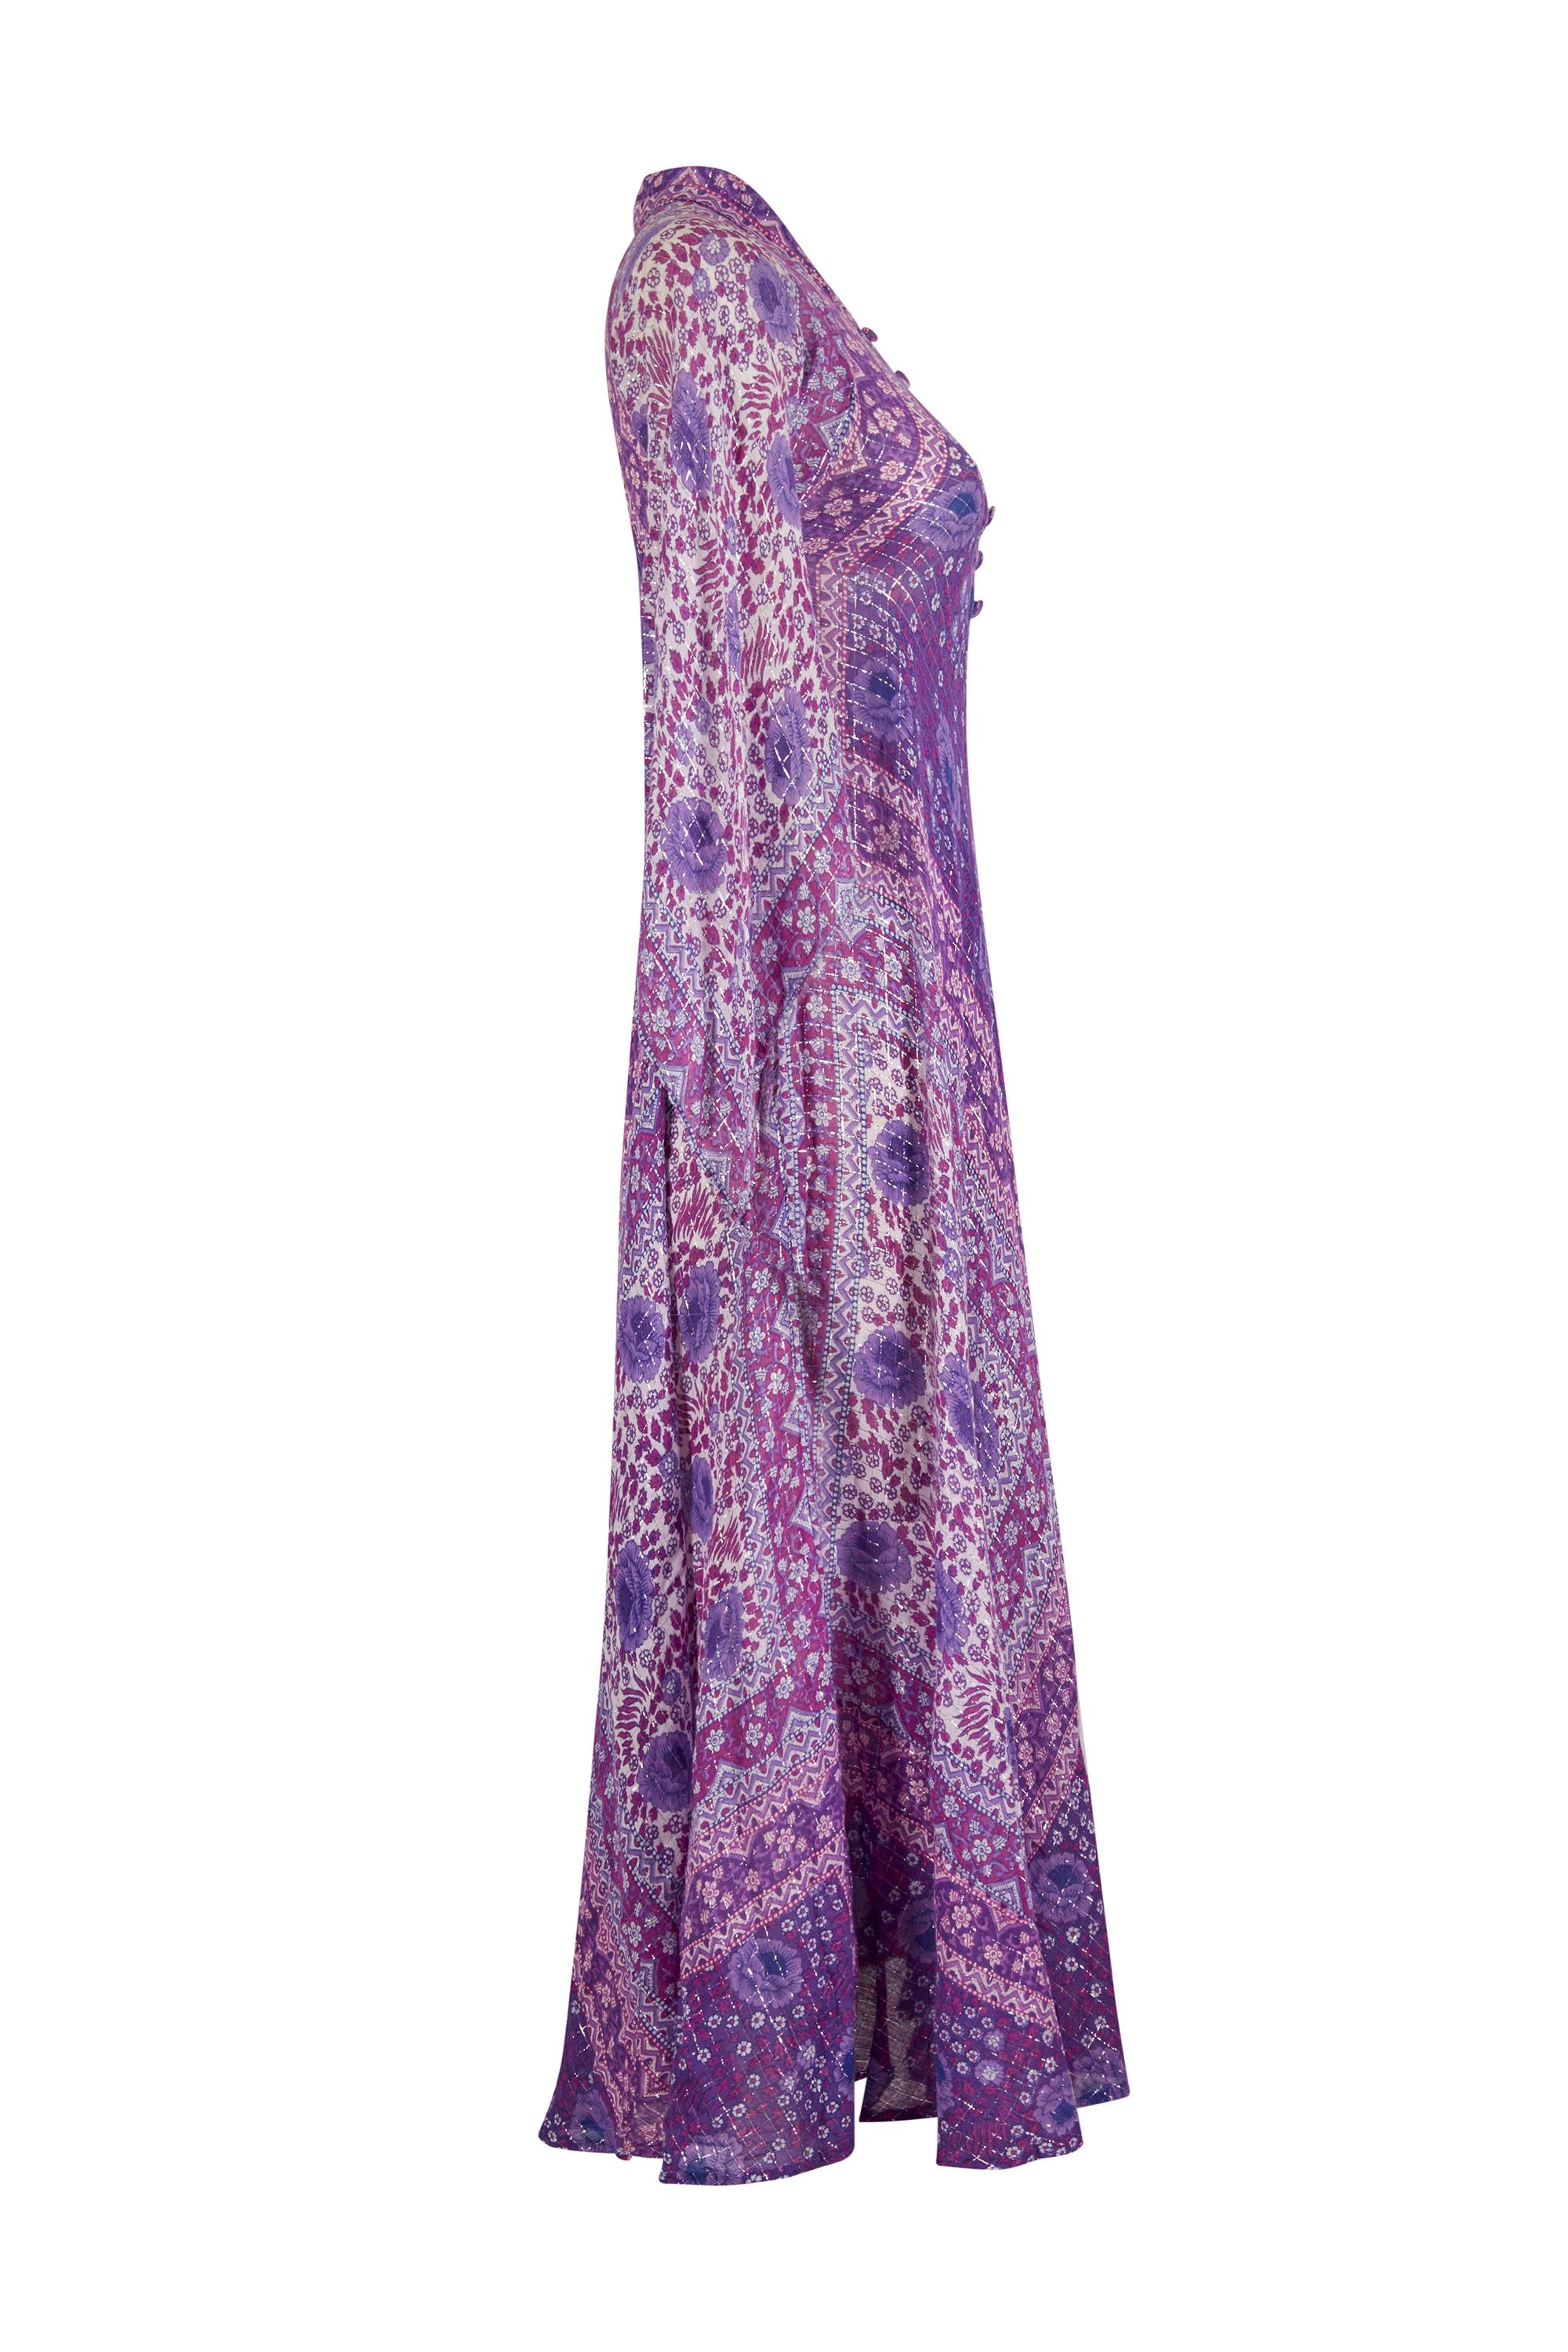 This 1978 purple cotton Sultana kaftan is by Adini, from the Holiday Collection is the most sought after manufacturer of these iconic dresses and is a rare find in exceptional vintage condition. The dress is comprised of hand block printed Indian